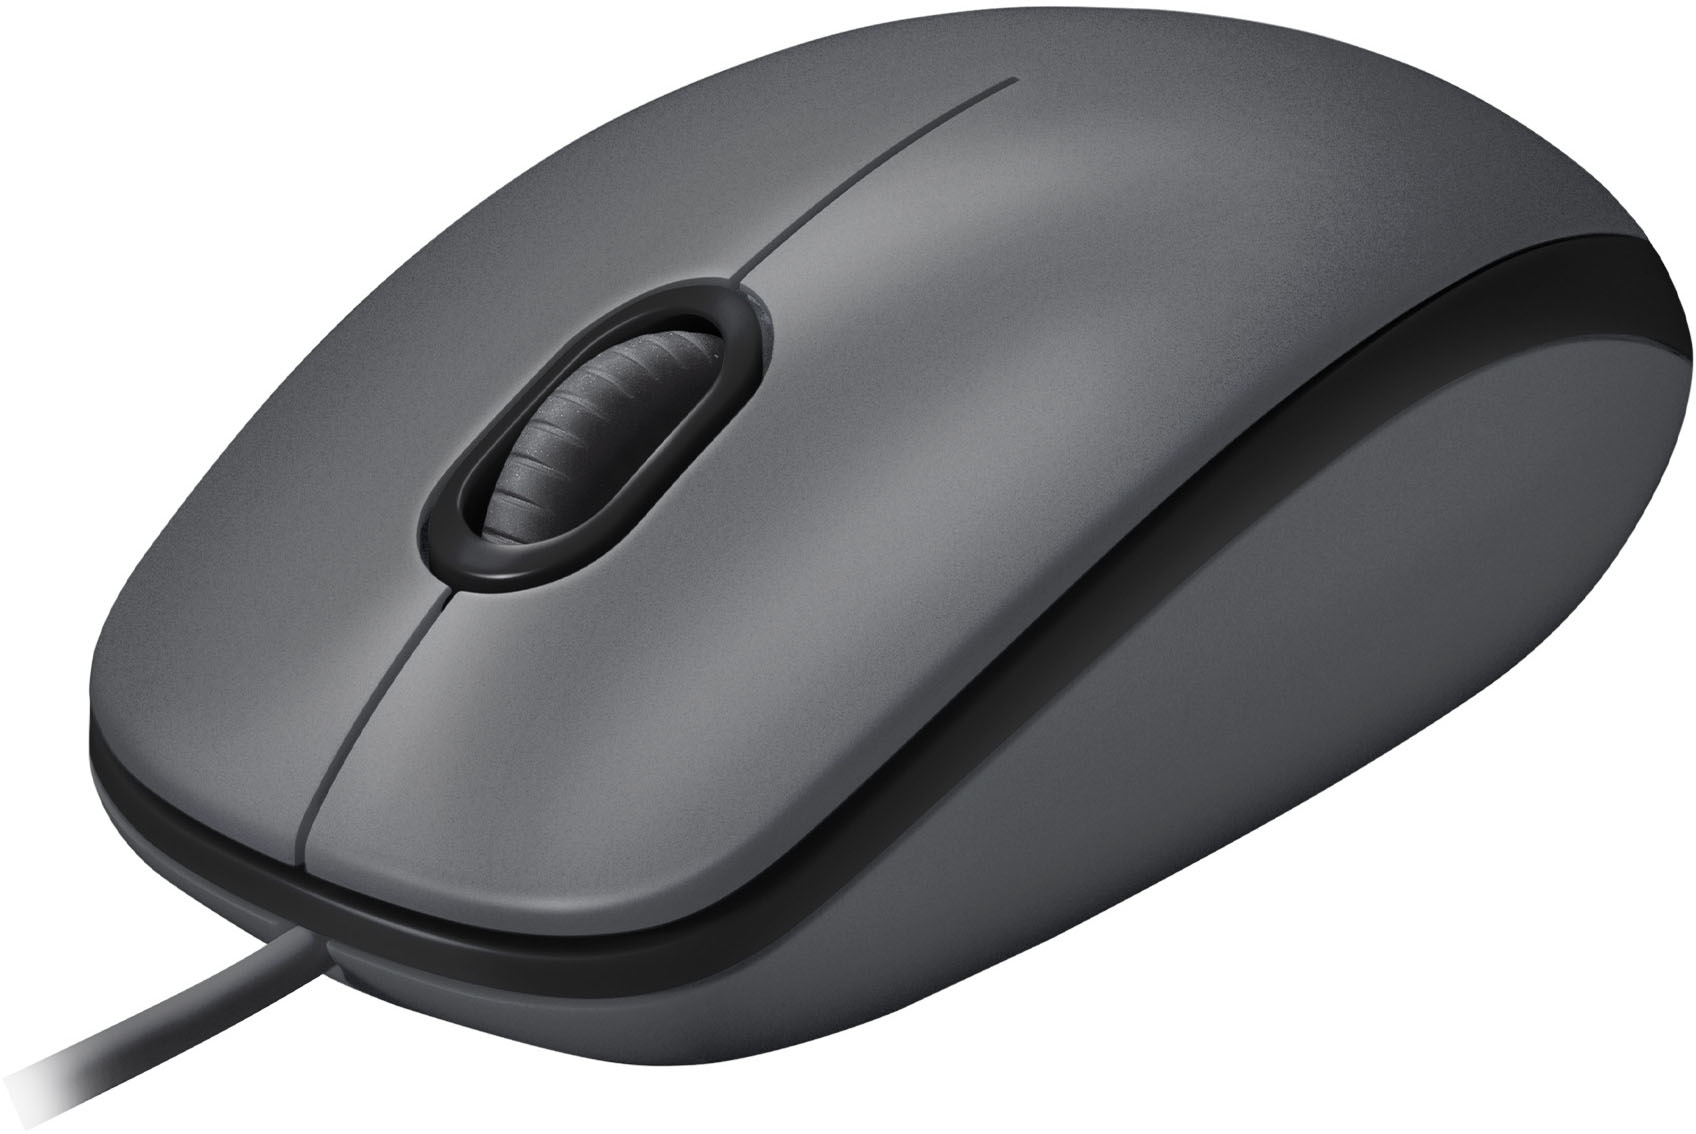 Logitech - M100 Wired Optical Ambidextrous Mouse with 1000 DPI Optical Tracking - Gray